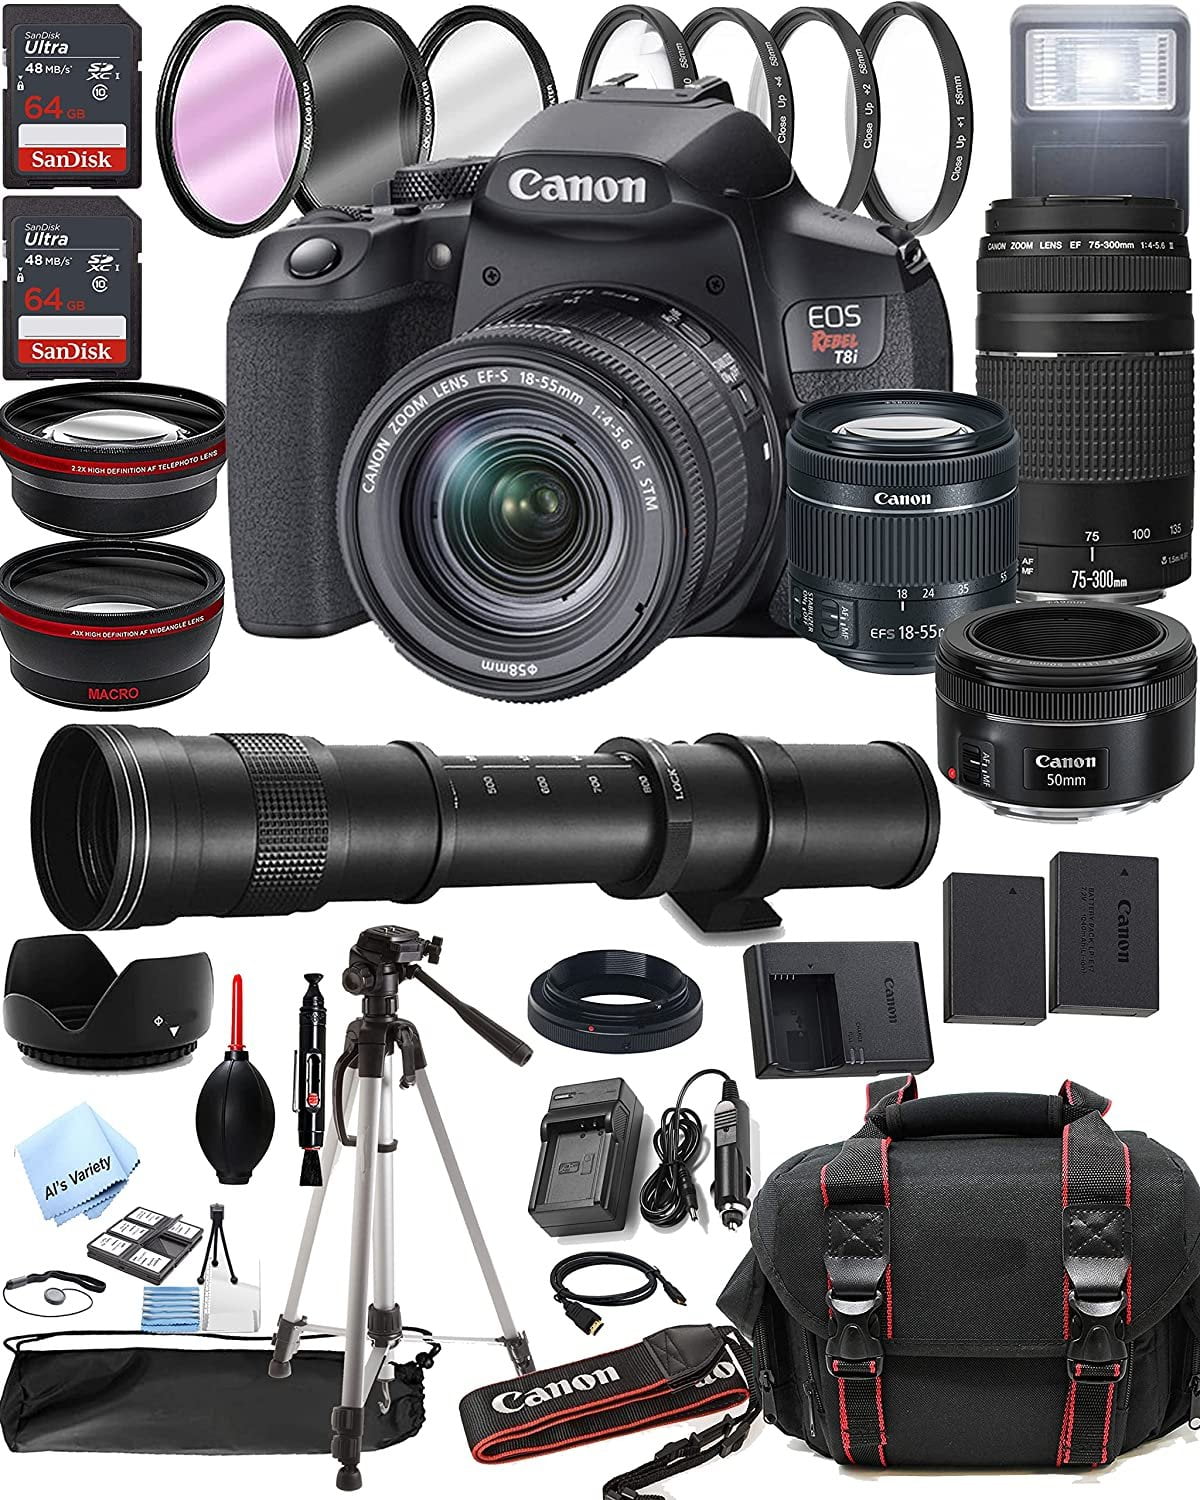 Canon EOS 250D DSLR Camera with 18-55mm f/3.5-5.6 Zoom Lens + 32GB Card,  Tripod, Case, and More (18pc Bundle) DSLR